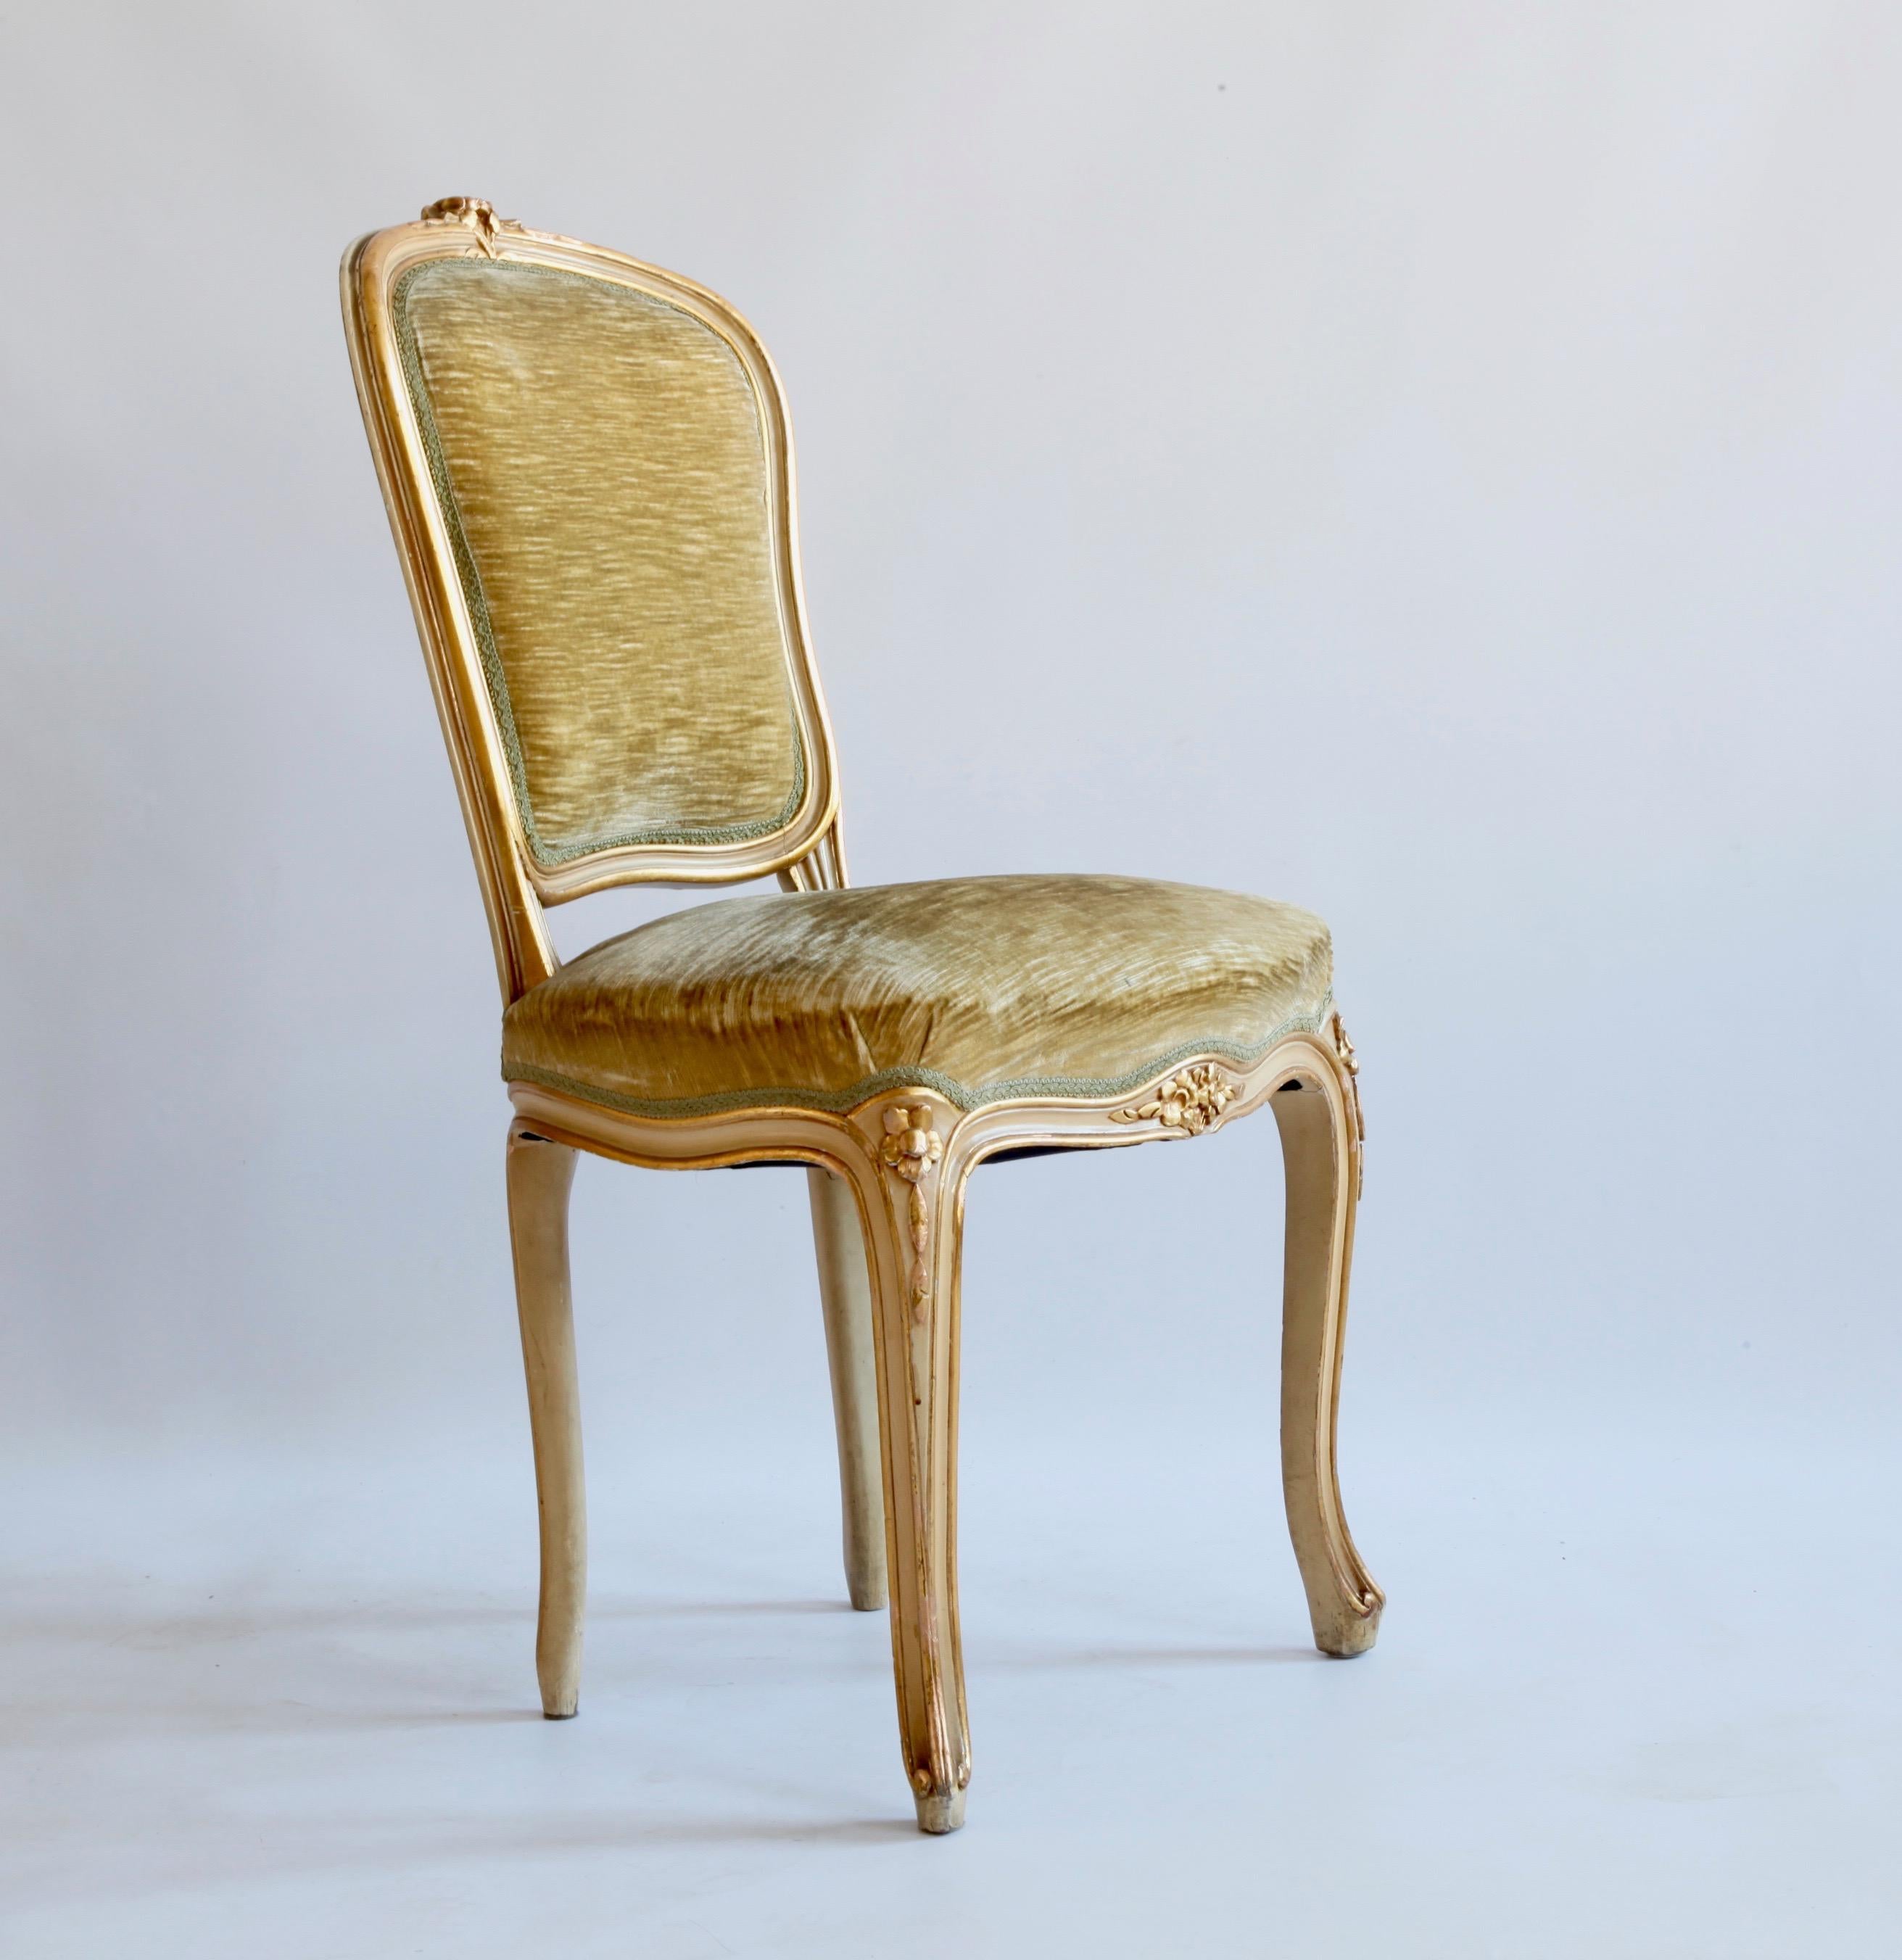 European Set of 6 Matching Louis XV Style Chairs, with Gilded Highlights